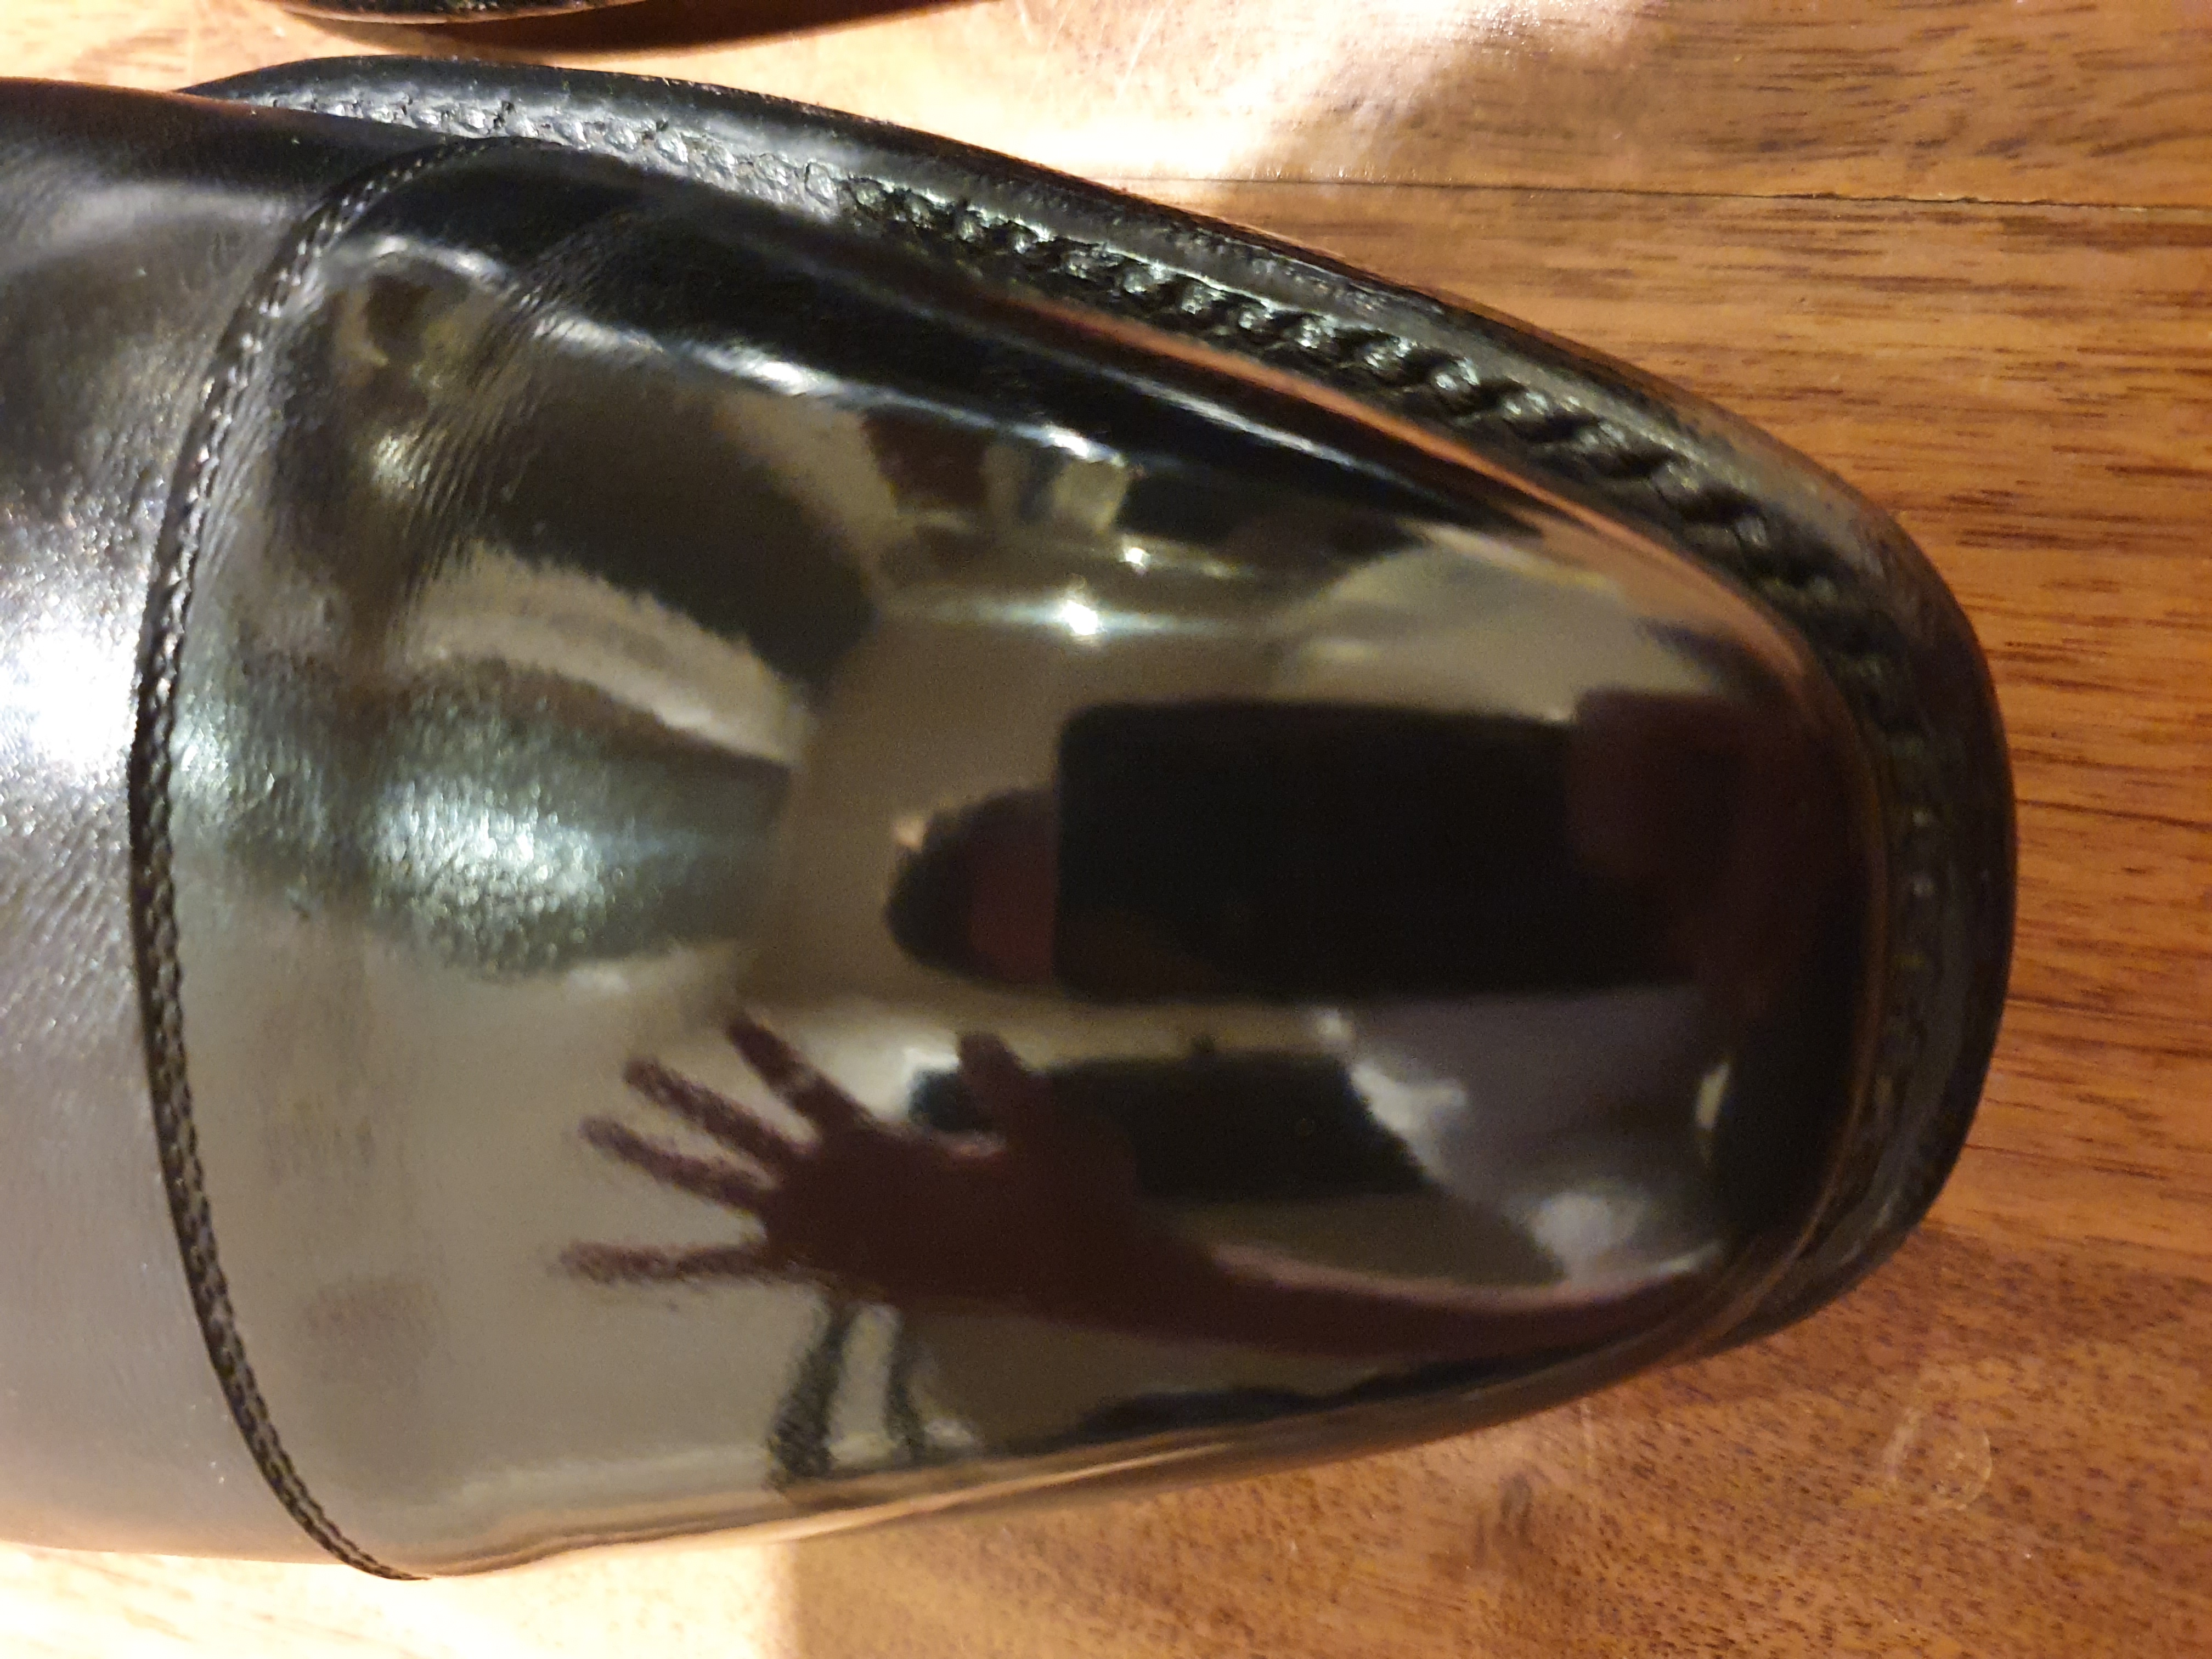 Shoeshine mirror effect on toe cap of black pair of Wildsmith boots